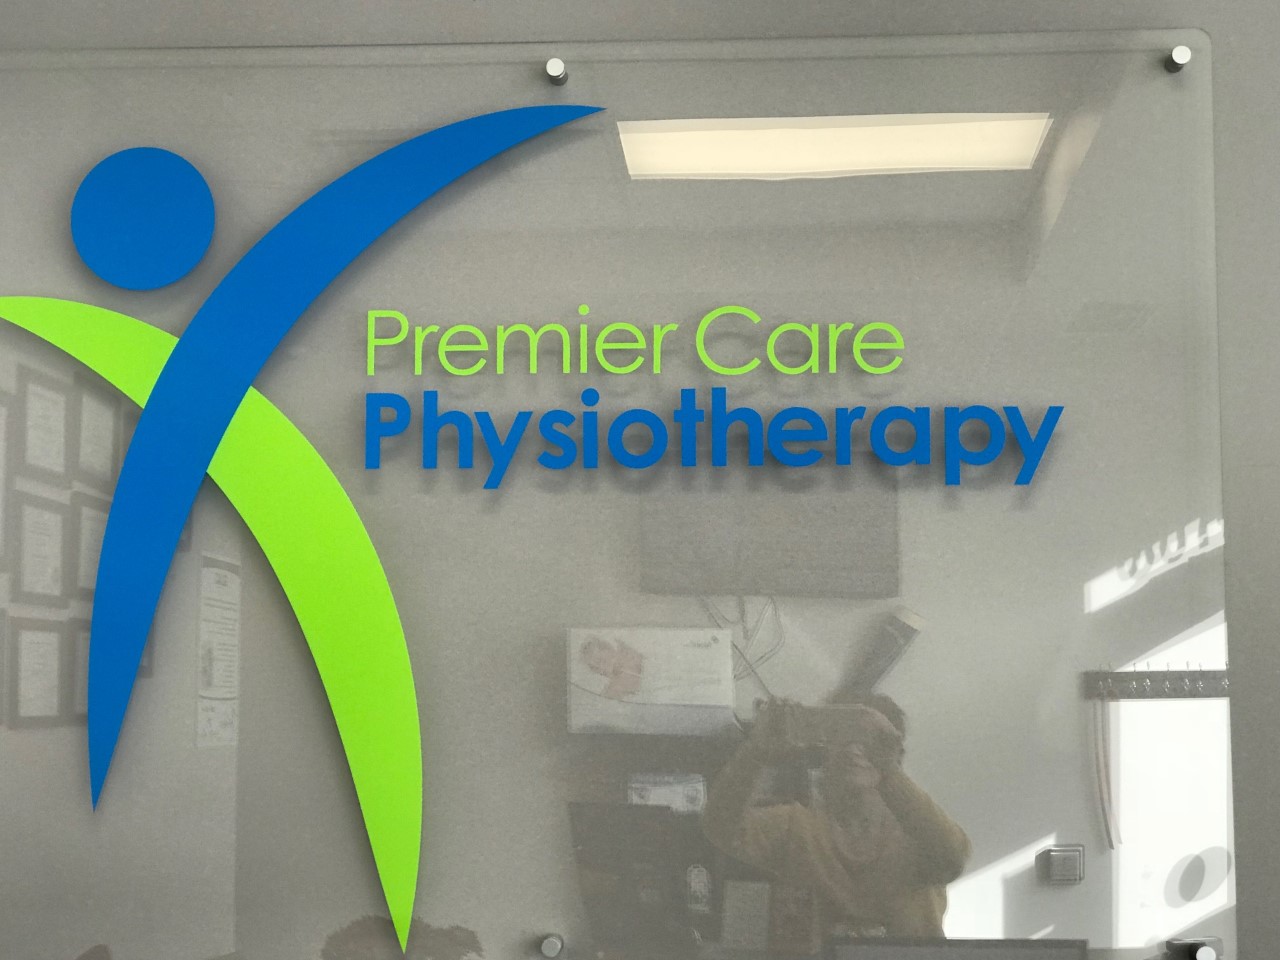 Premier Care Physiotherapy